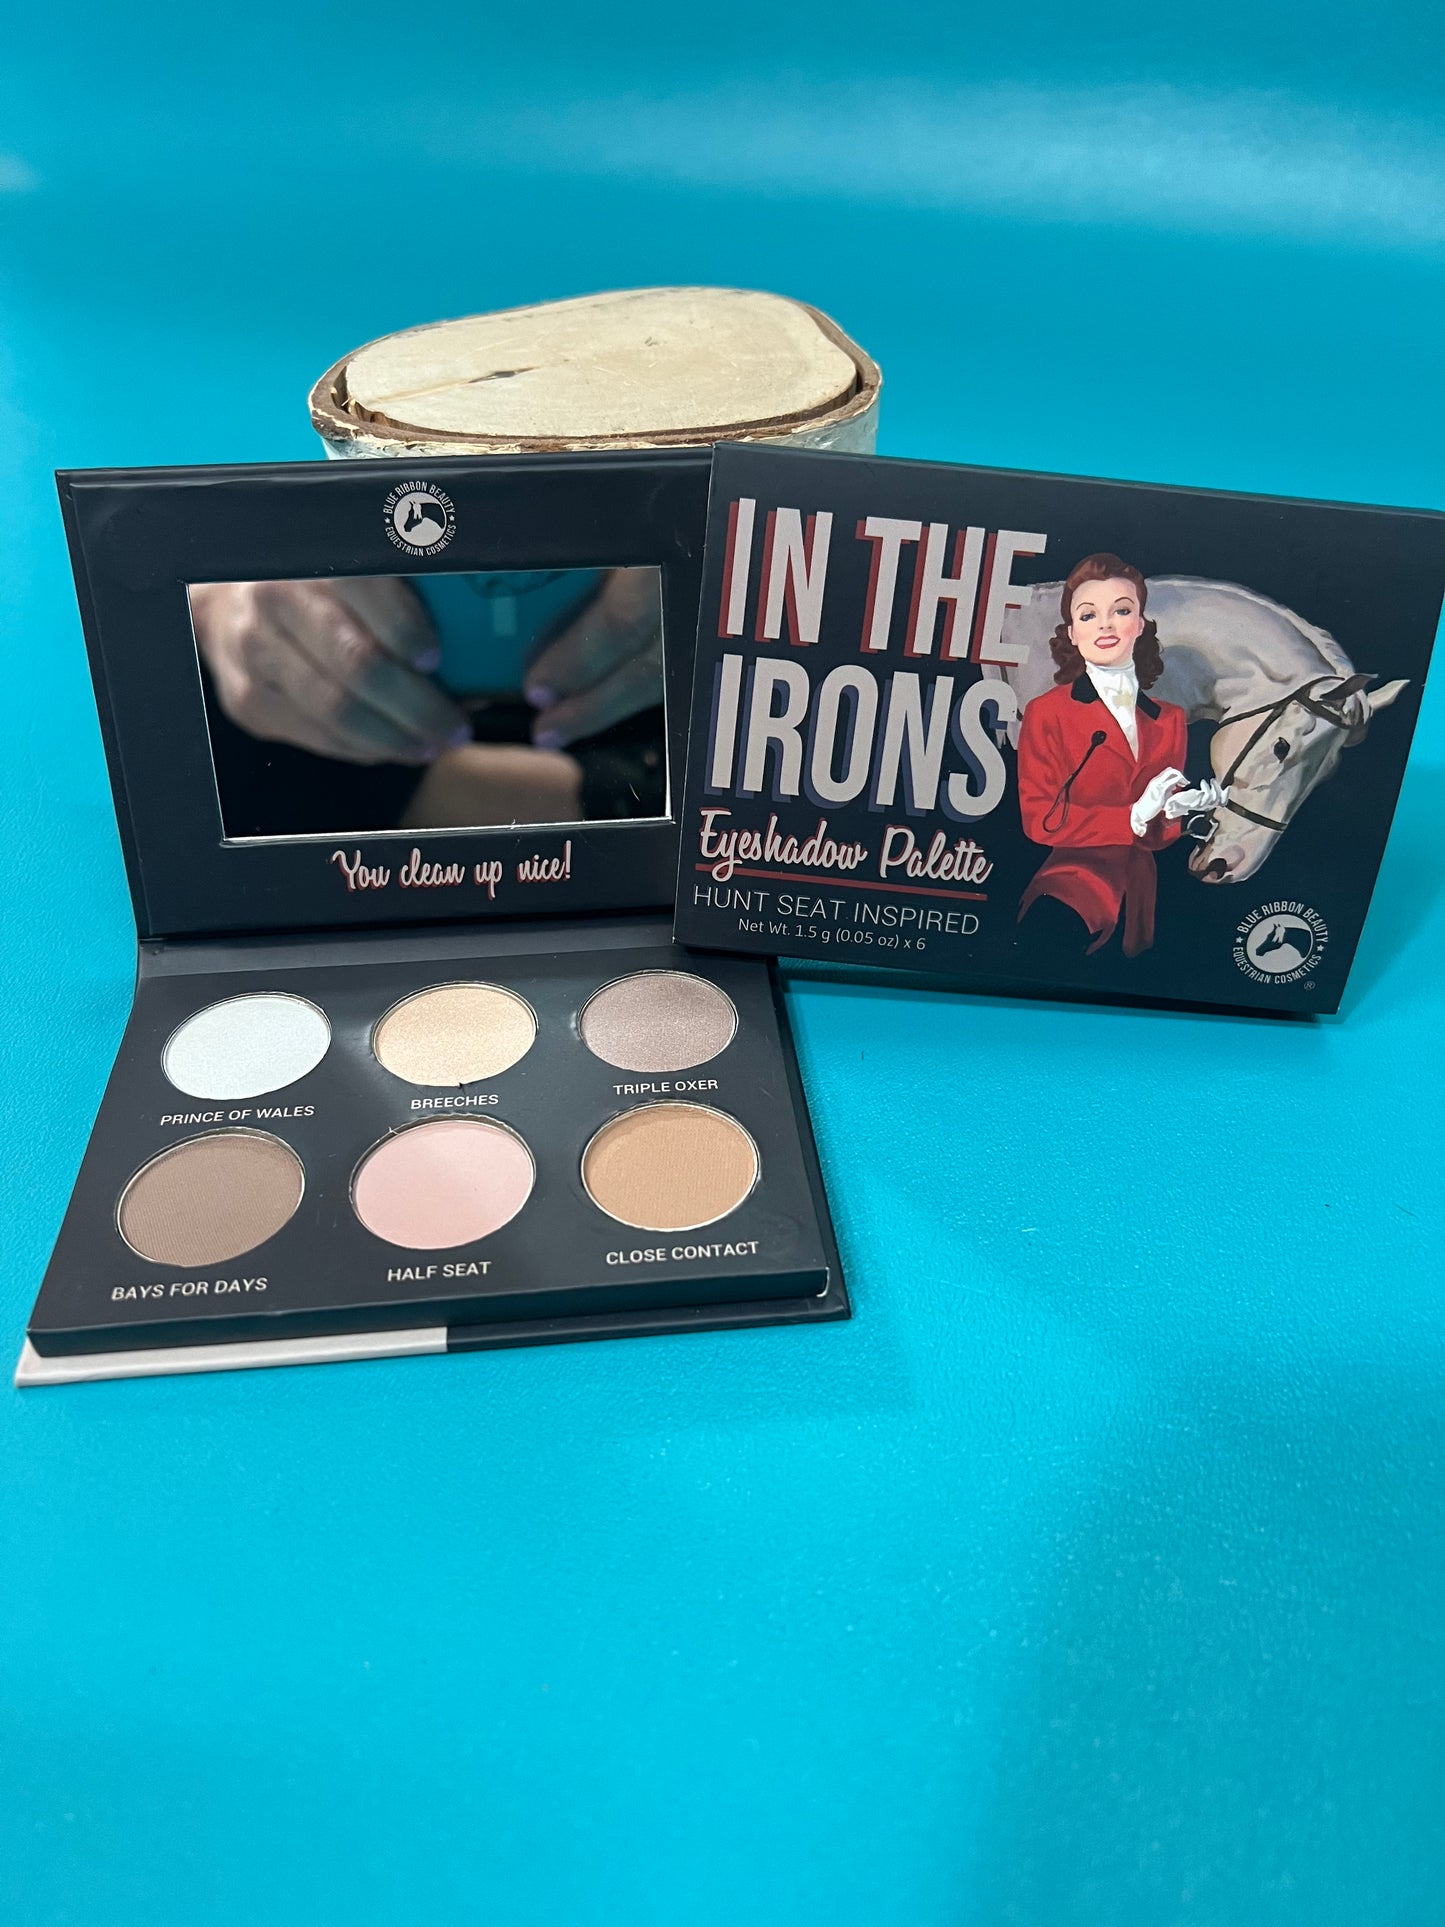 In The Irons Makeup